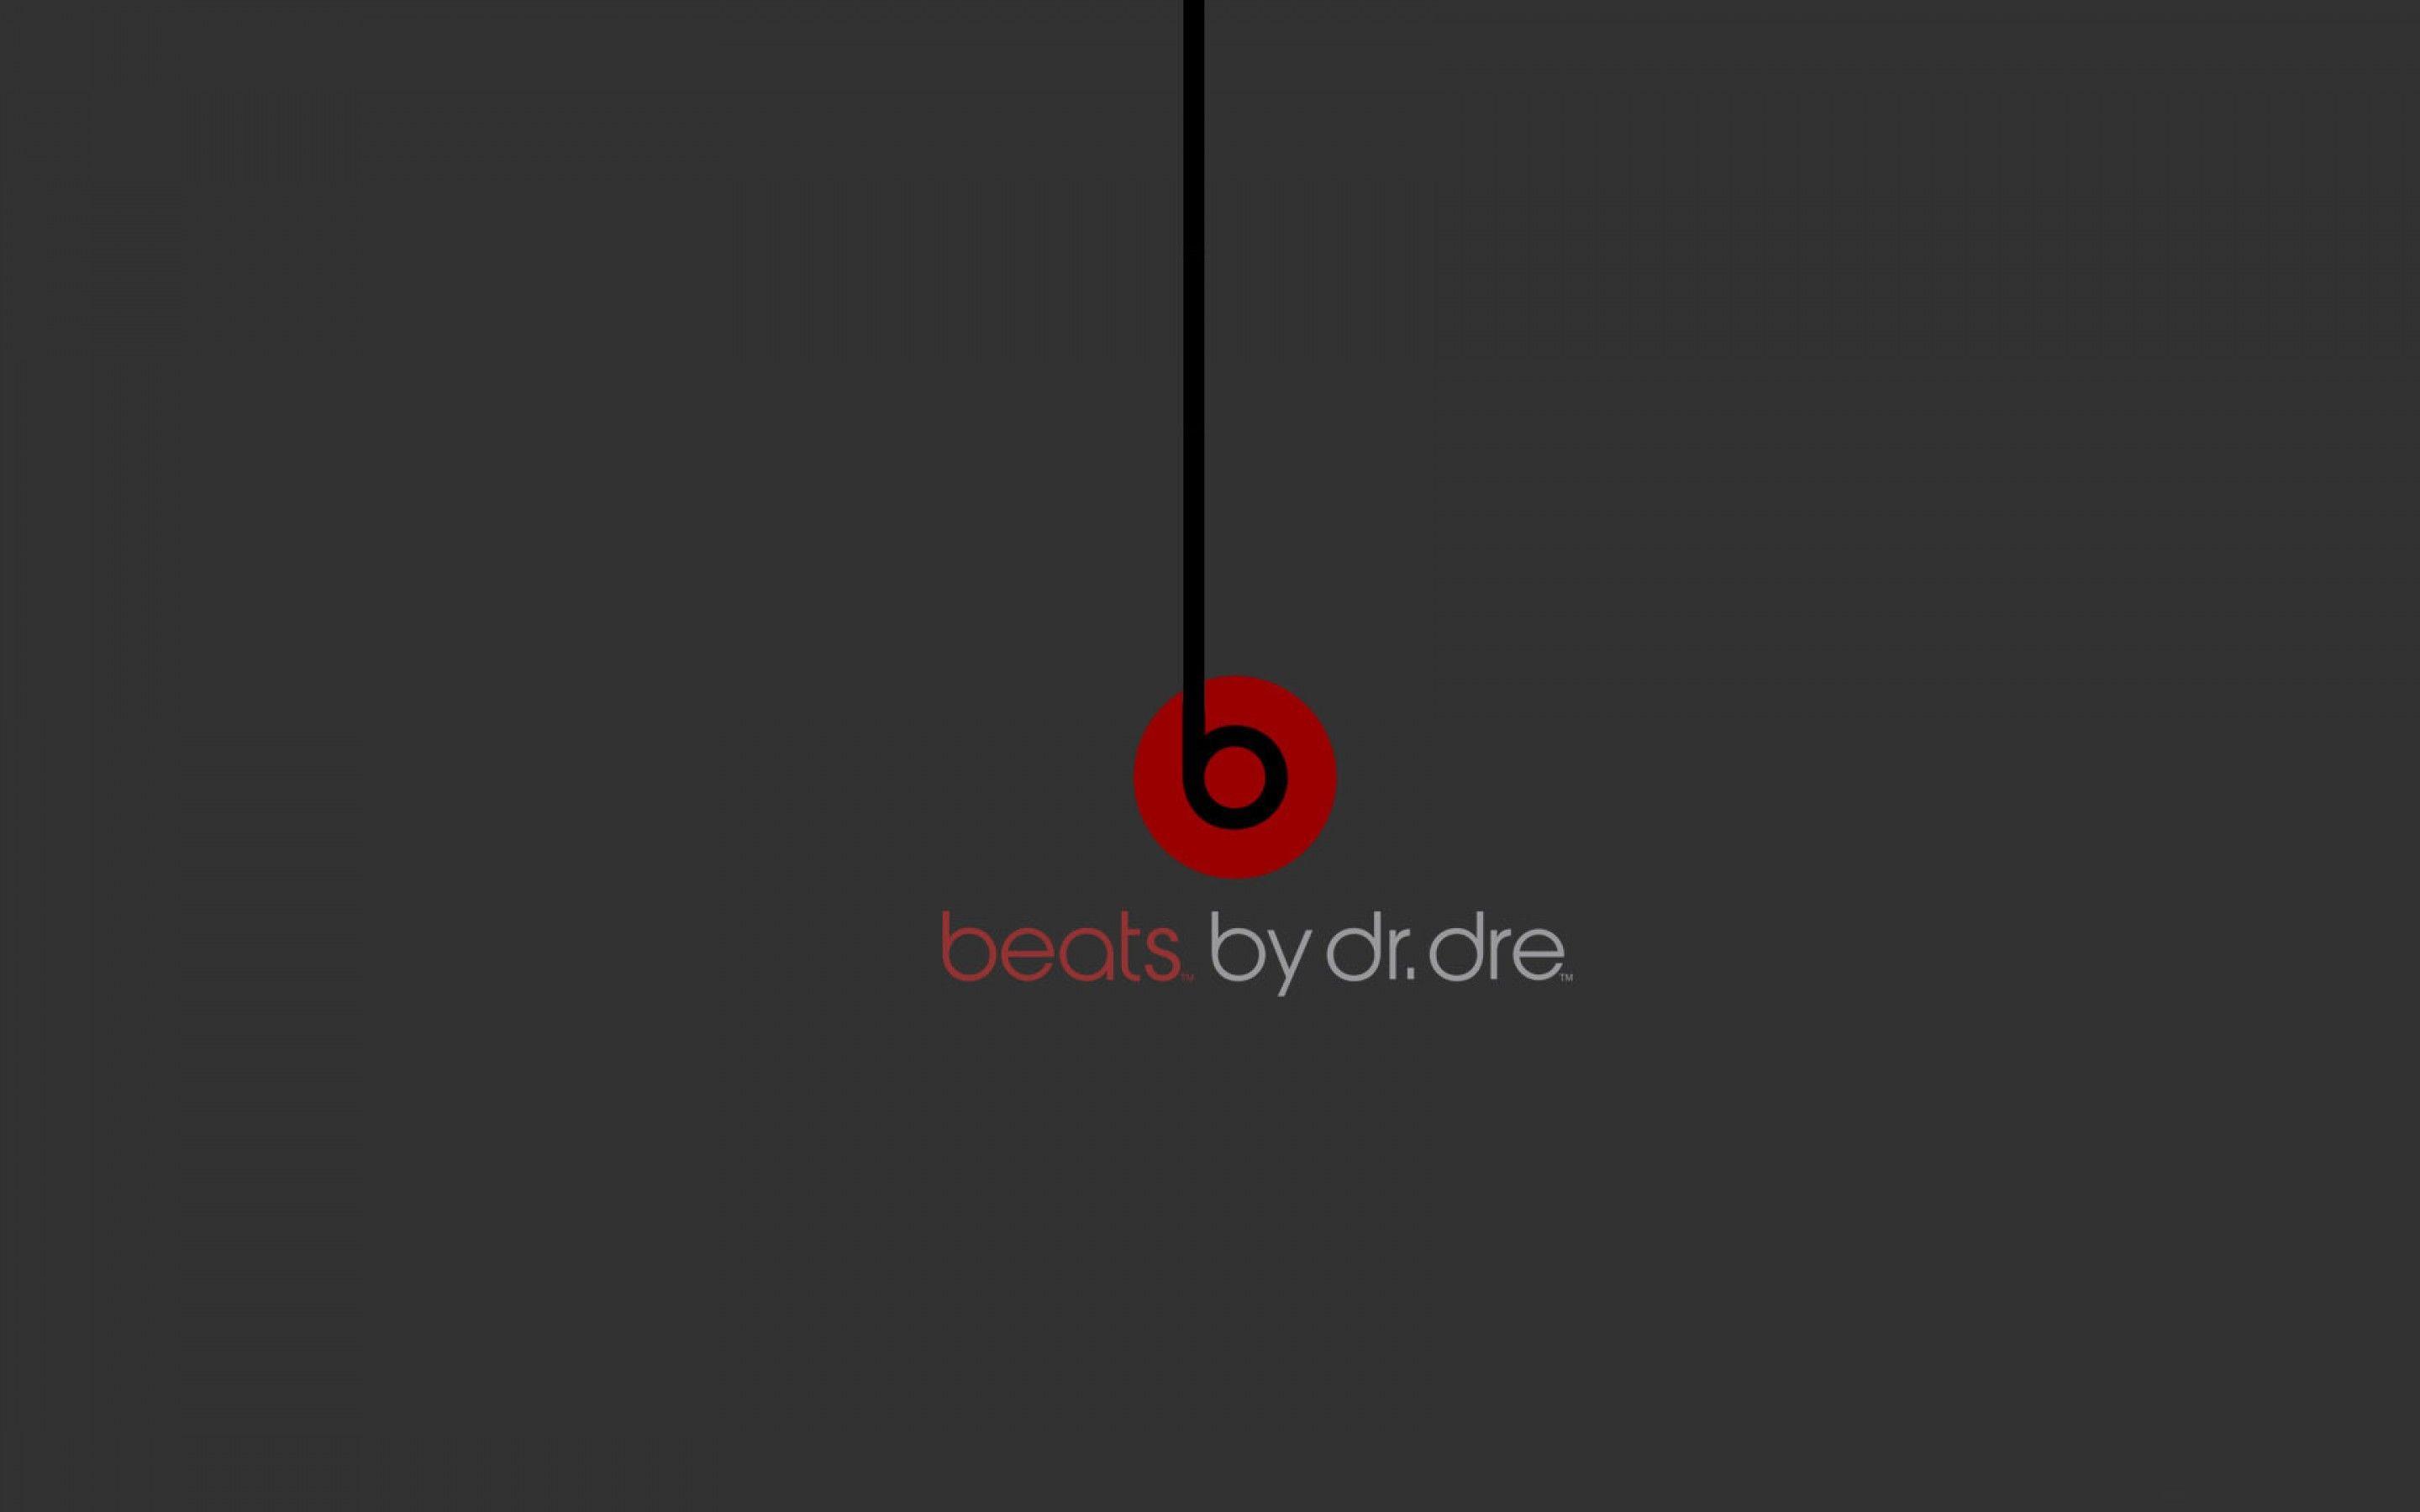 Dr. Dre Beats Logo - Image result for beats by dre logo wallpaper hd | Product Spot ...